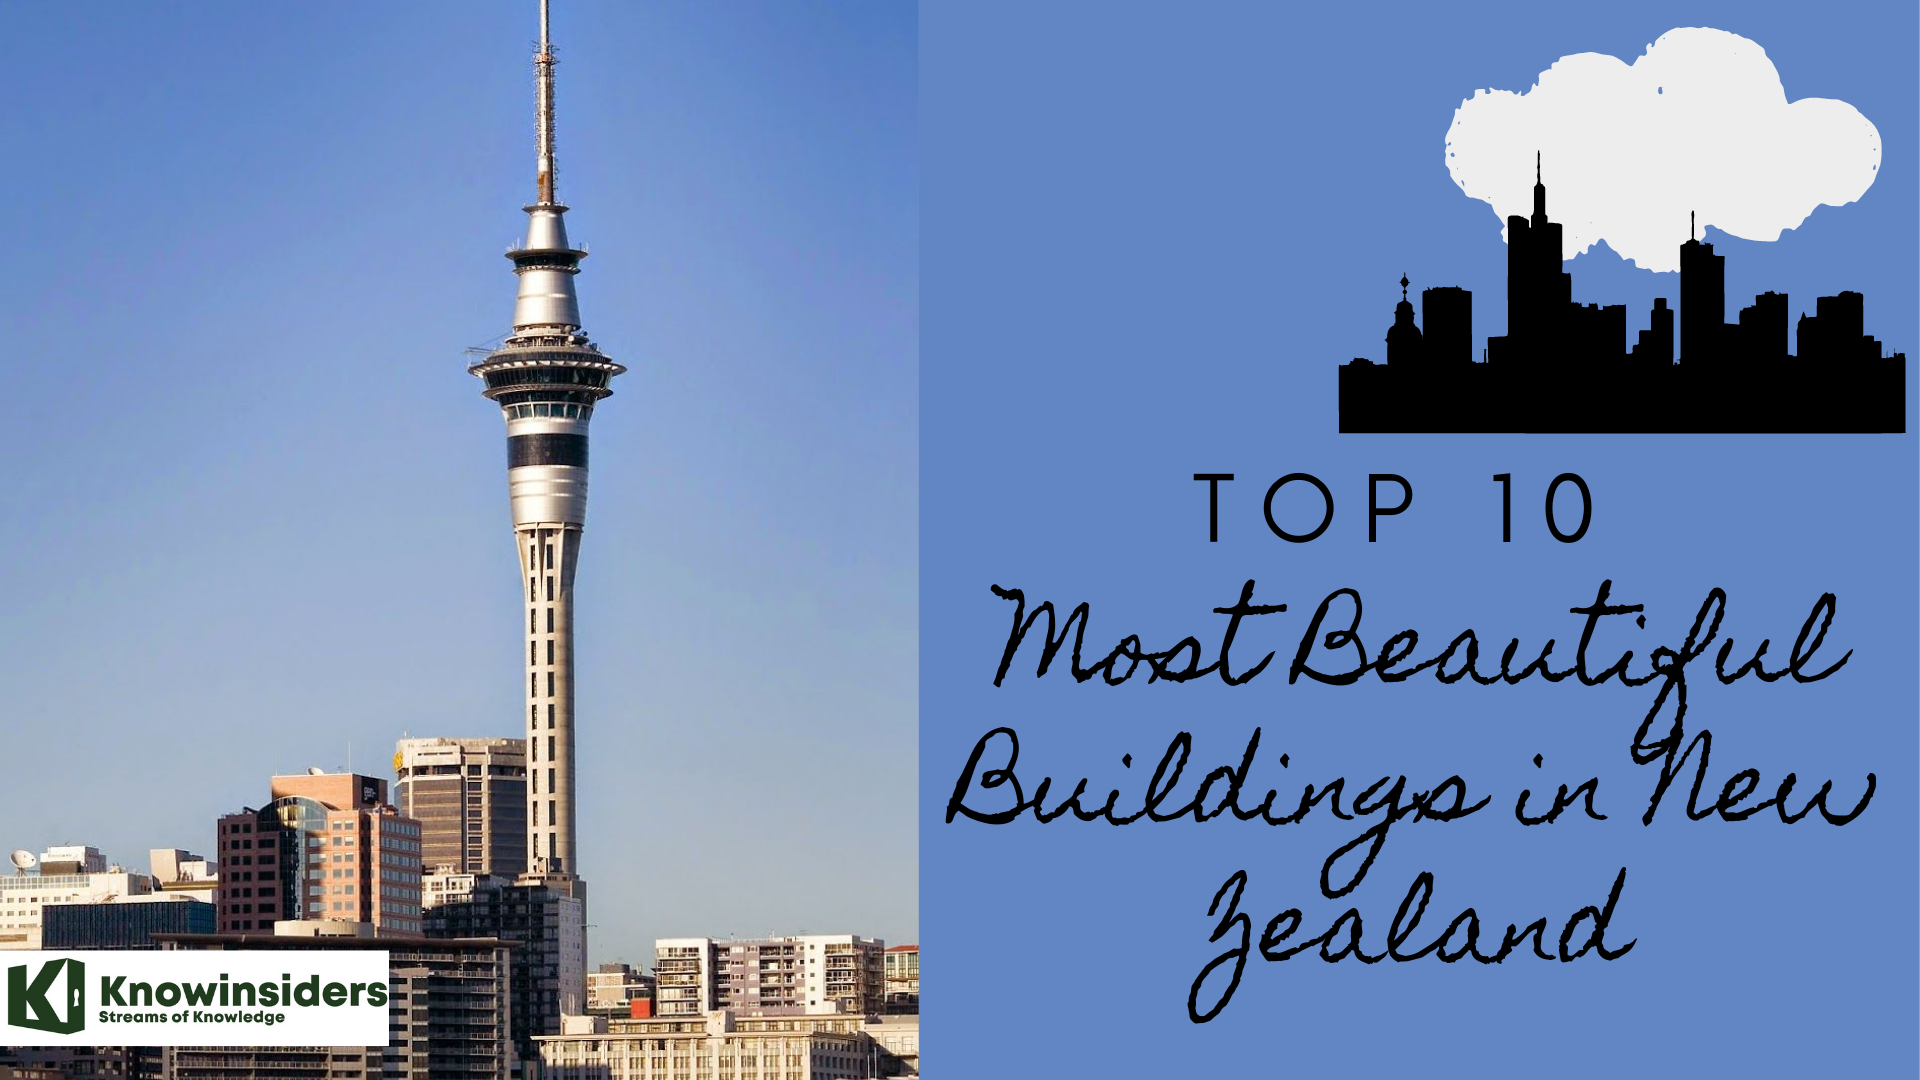 Top 10 most beautiful buildings in New Zealand